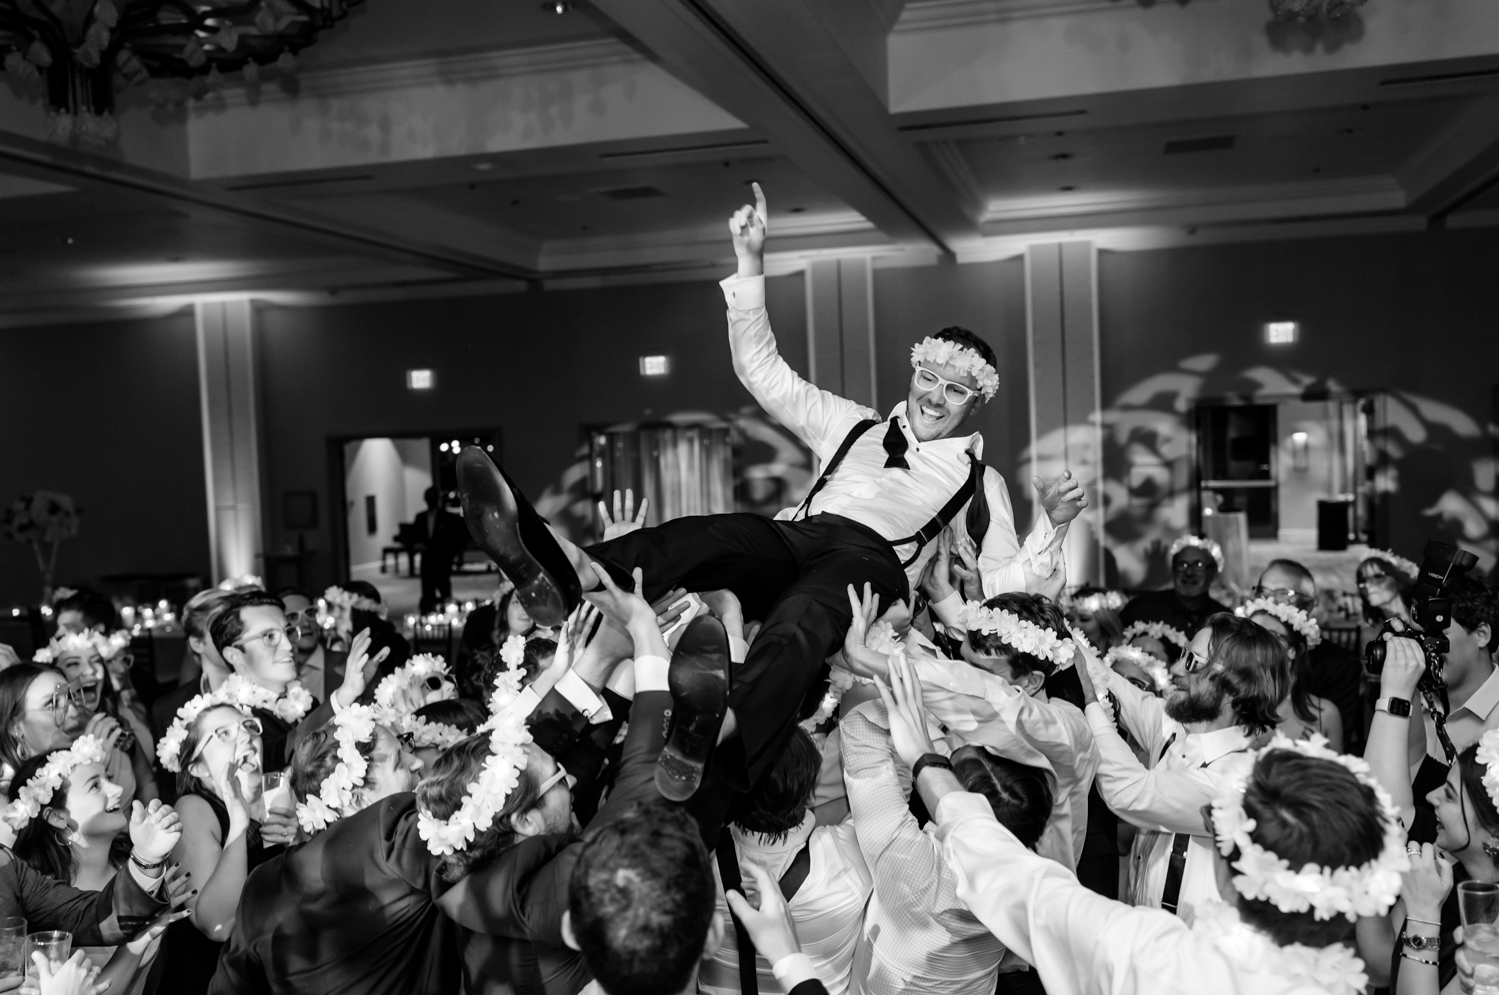 The groom crowdsurfs, hands in the air.